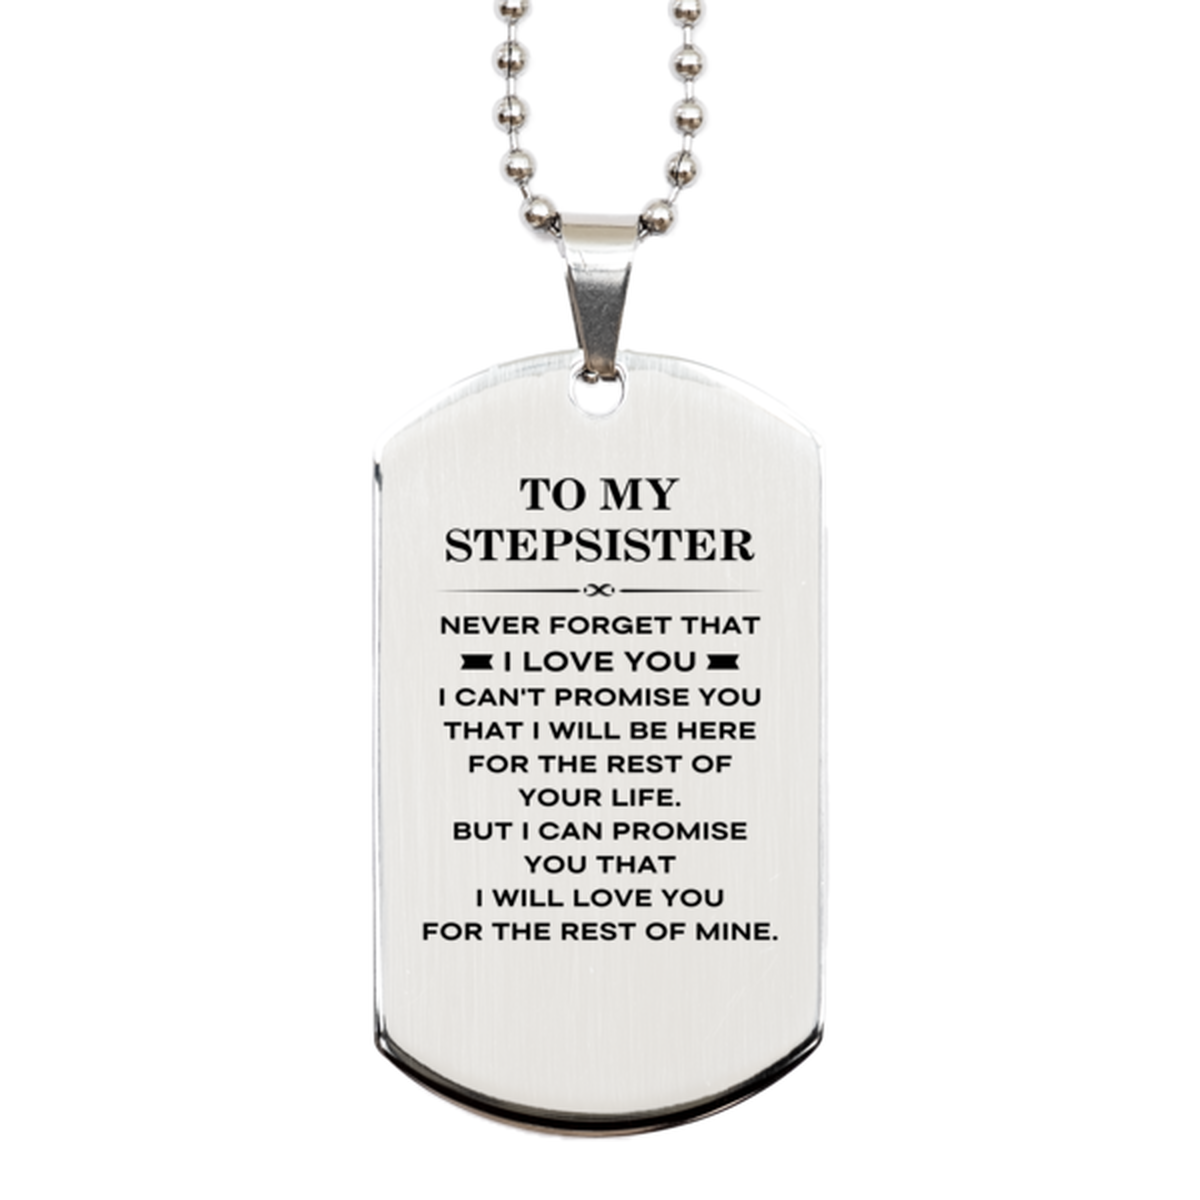 To My Stepsister Gifts, I will love you for the rest of mine, Love Stepsister Dog Tag Necklace, Birthday Christmas Unique Silver Dog Tag For Stepsister